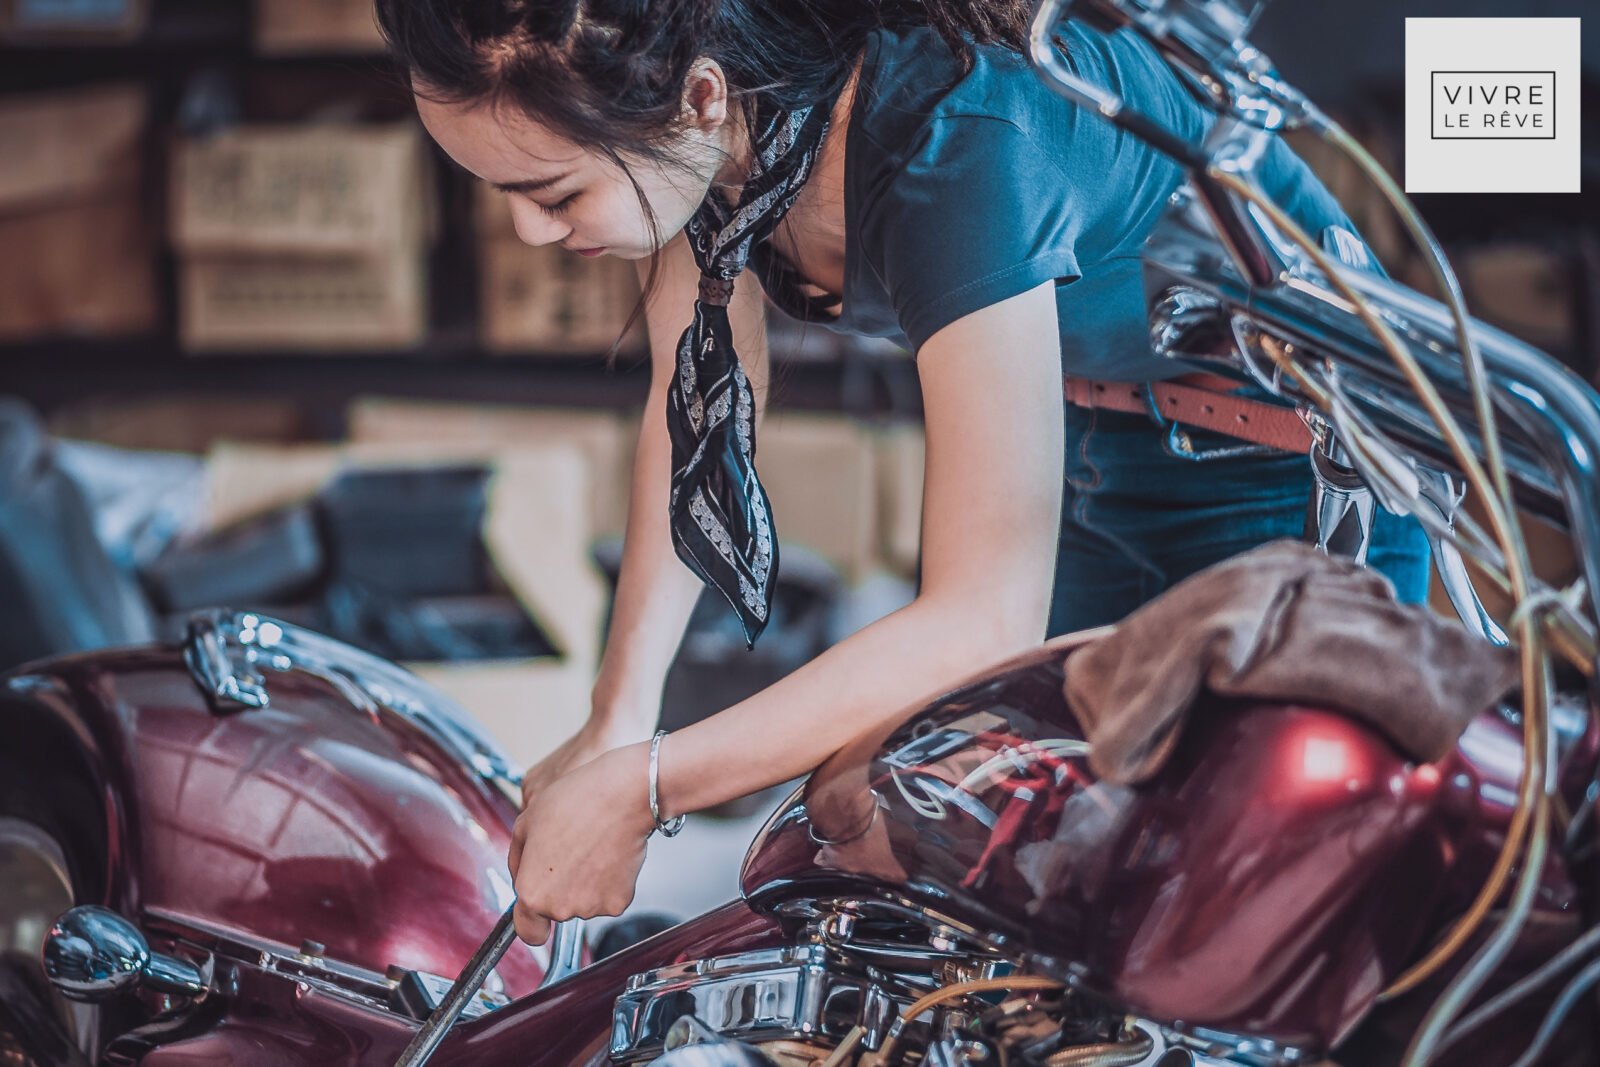 Why Aren’t There More Women in the Automotive Industry?